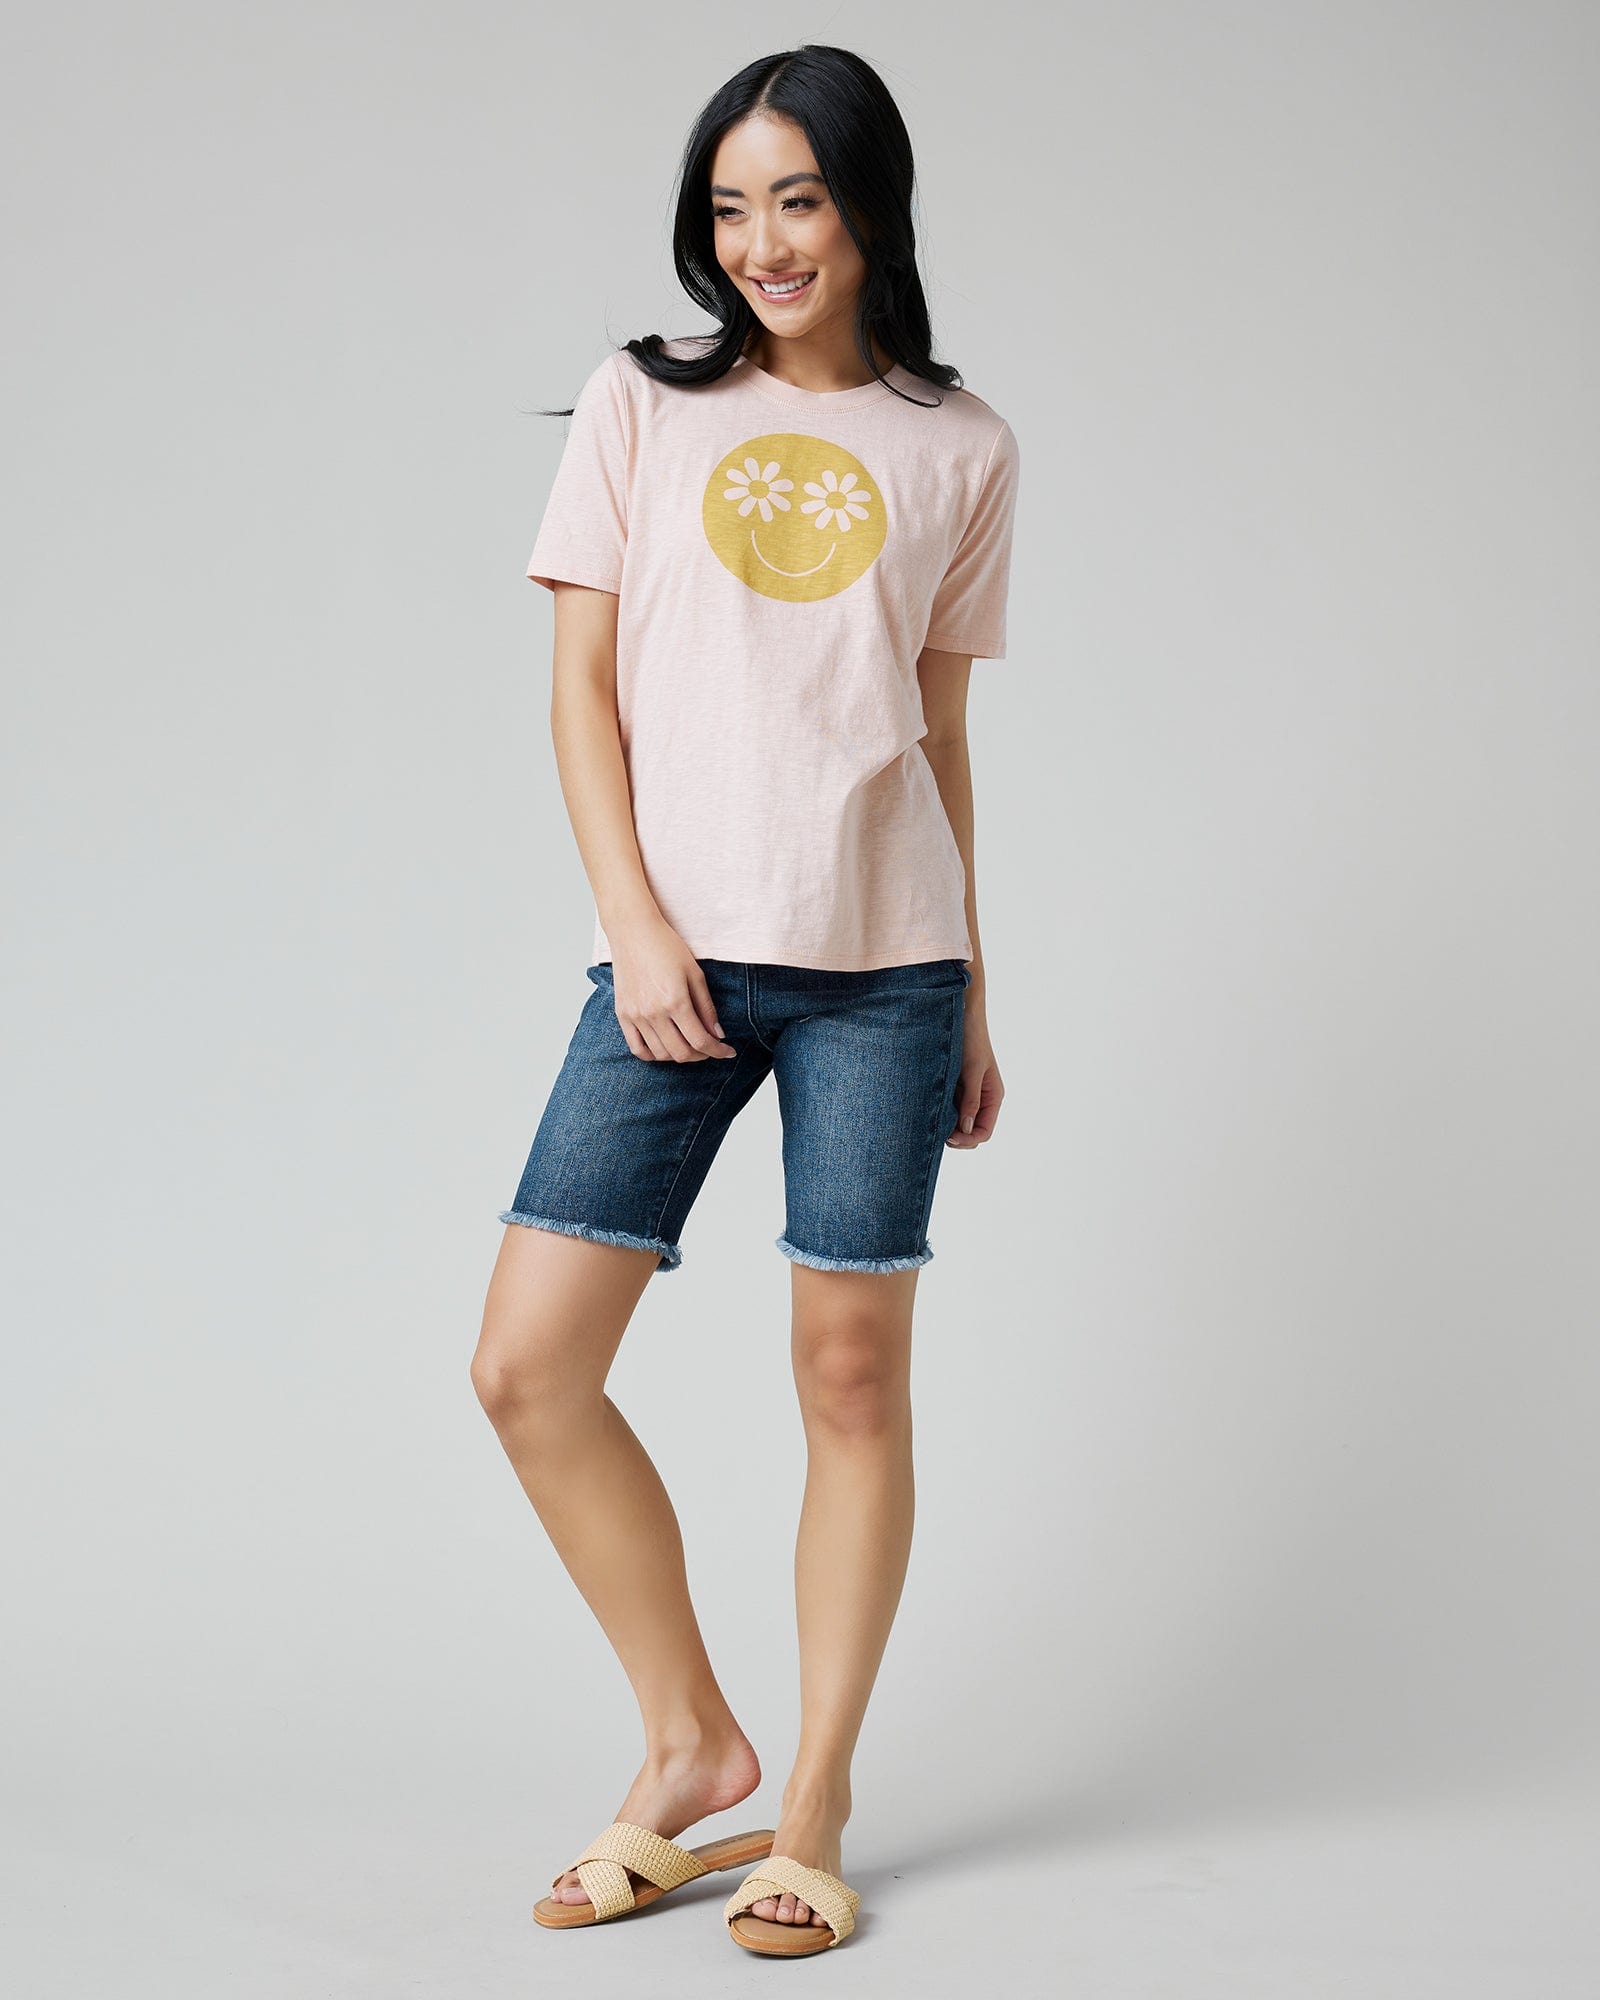 Woman in a pink graphic tee with a smiley face on front